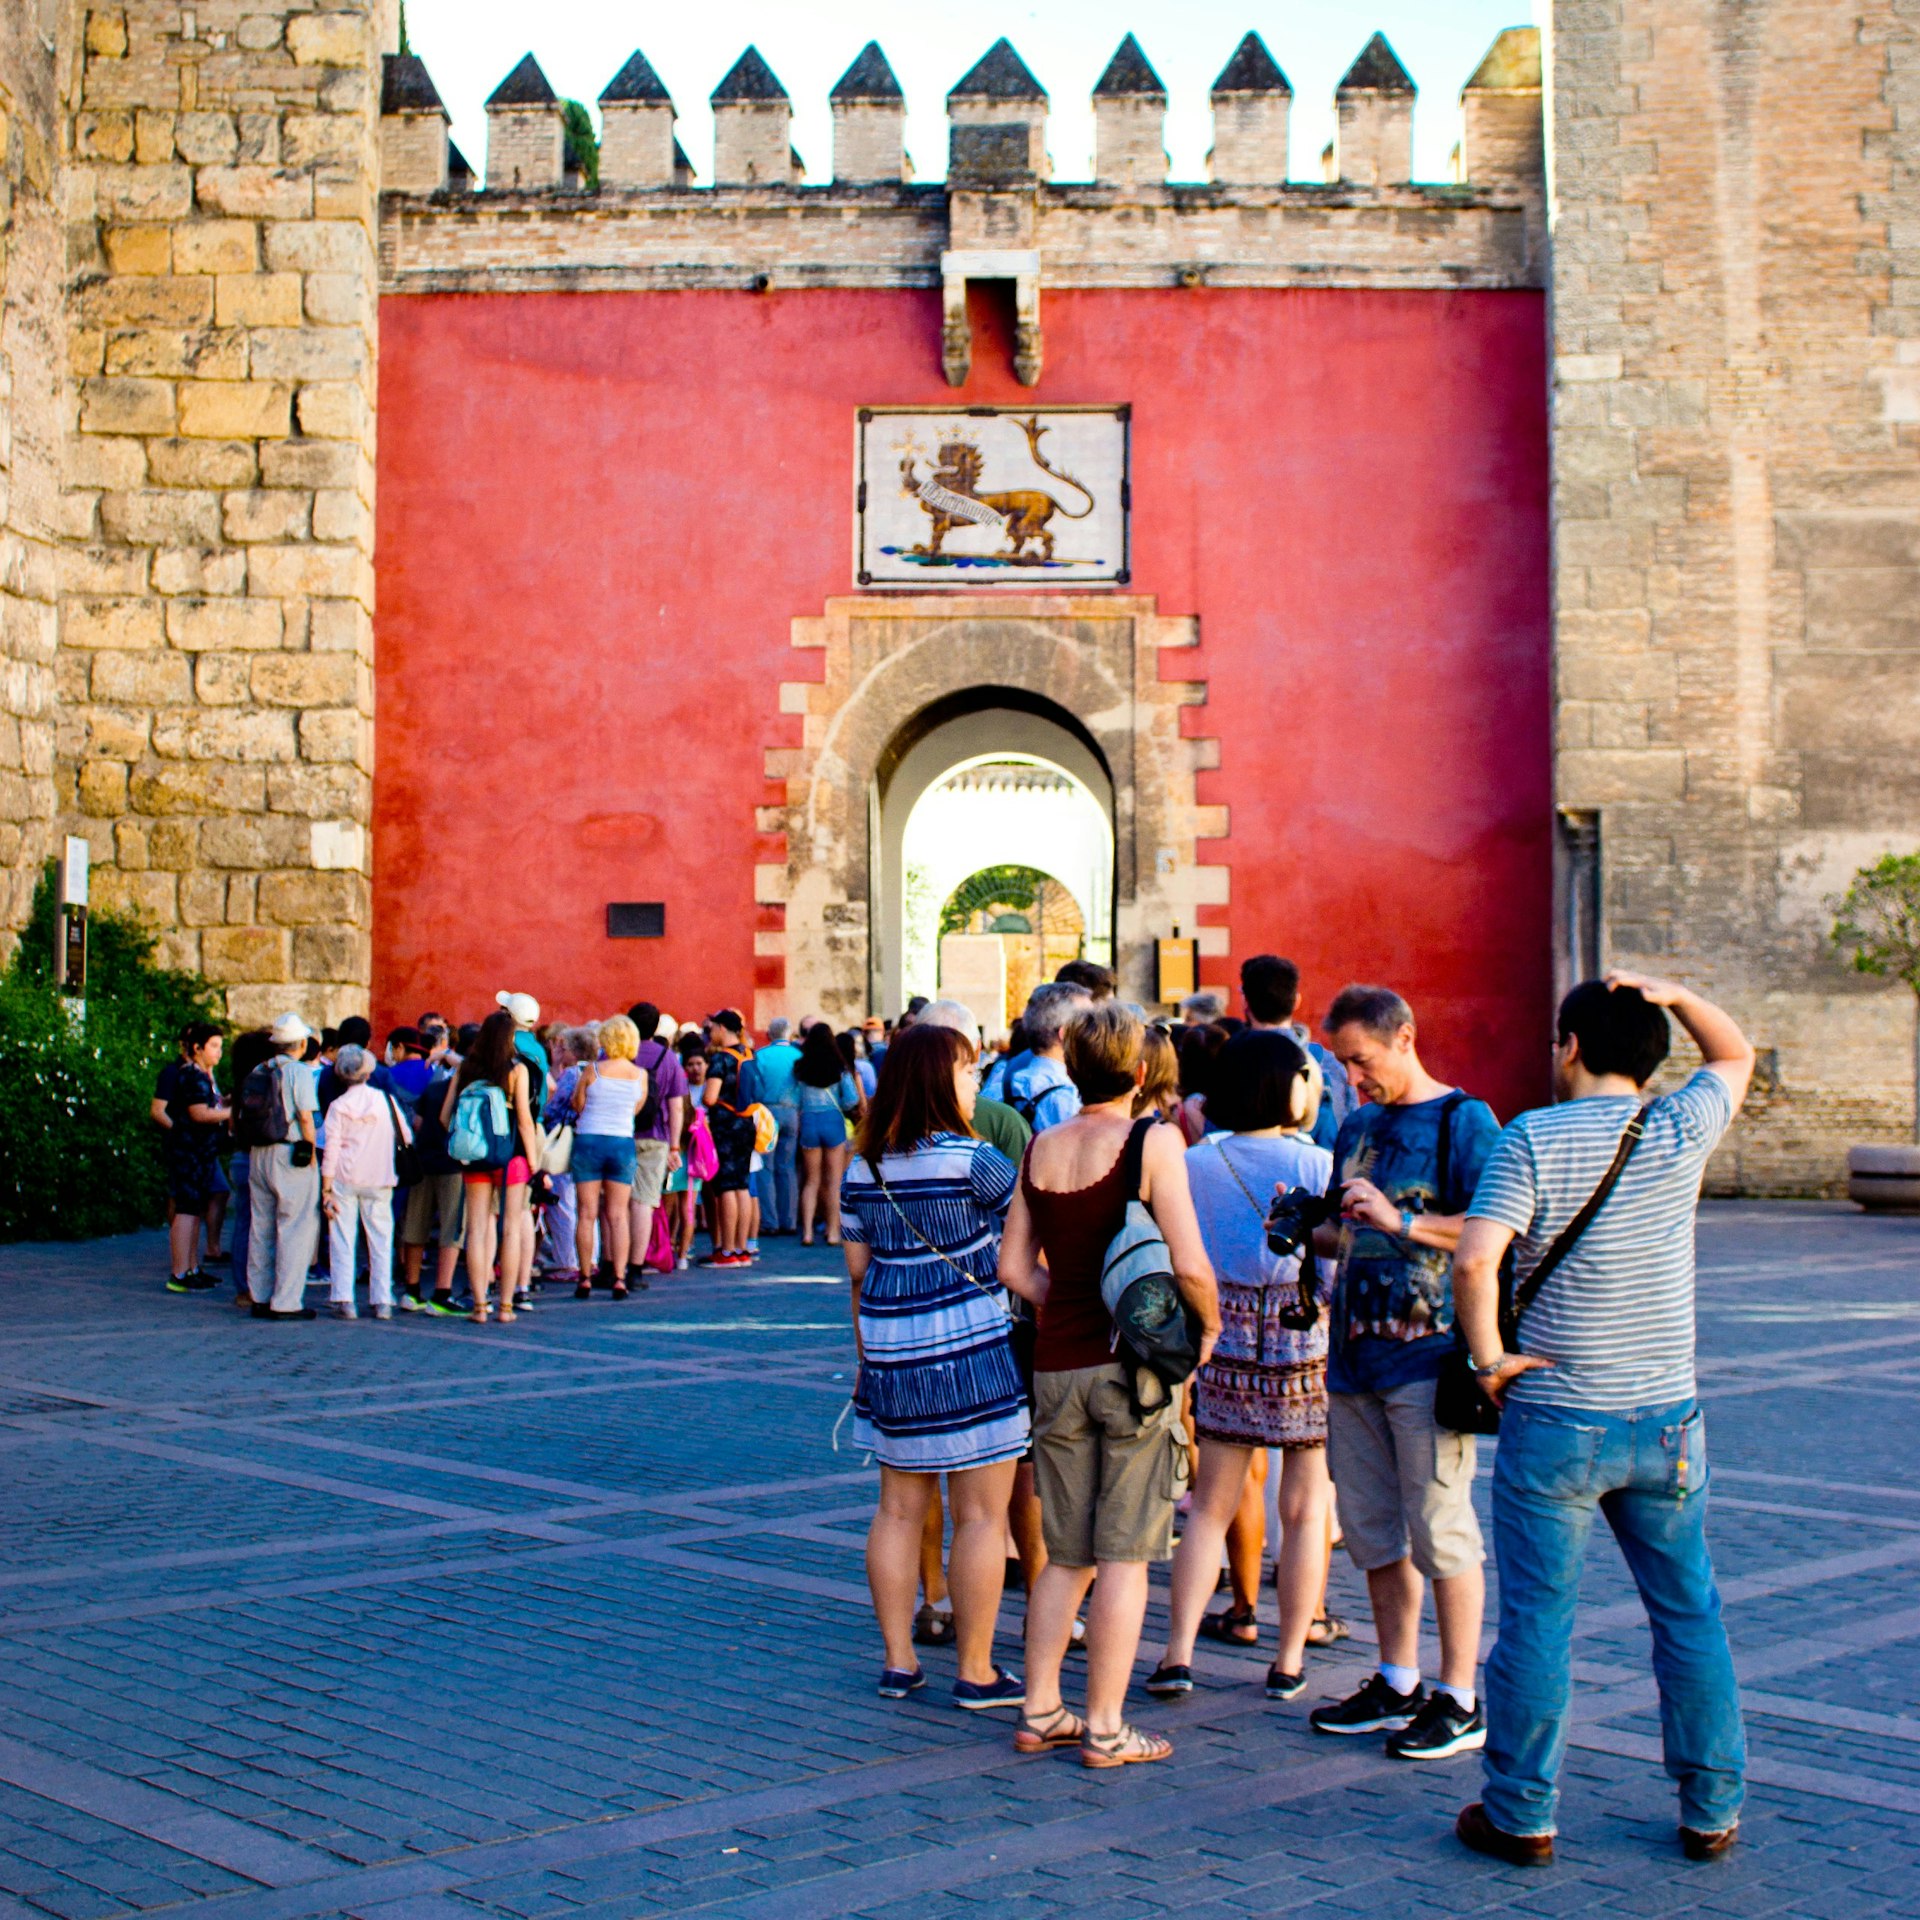 The exterior wall of the Real Alcázar castle in Spain with a crest of a lion on the wall below the castellated top of the wall. In the foreground are tourists queuing for entry